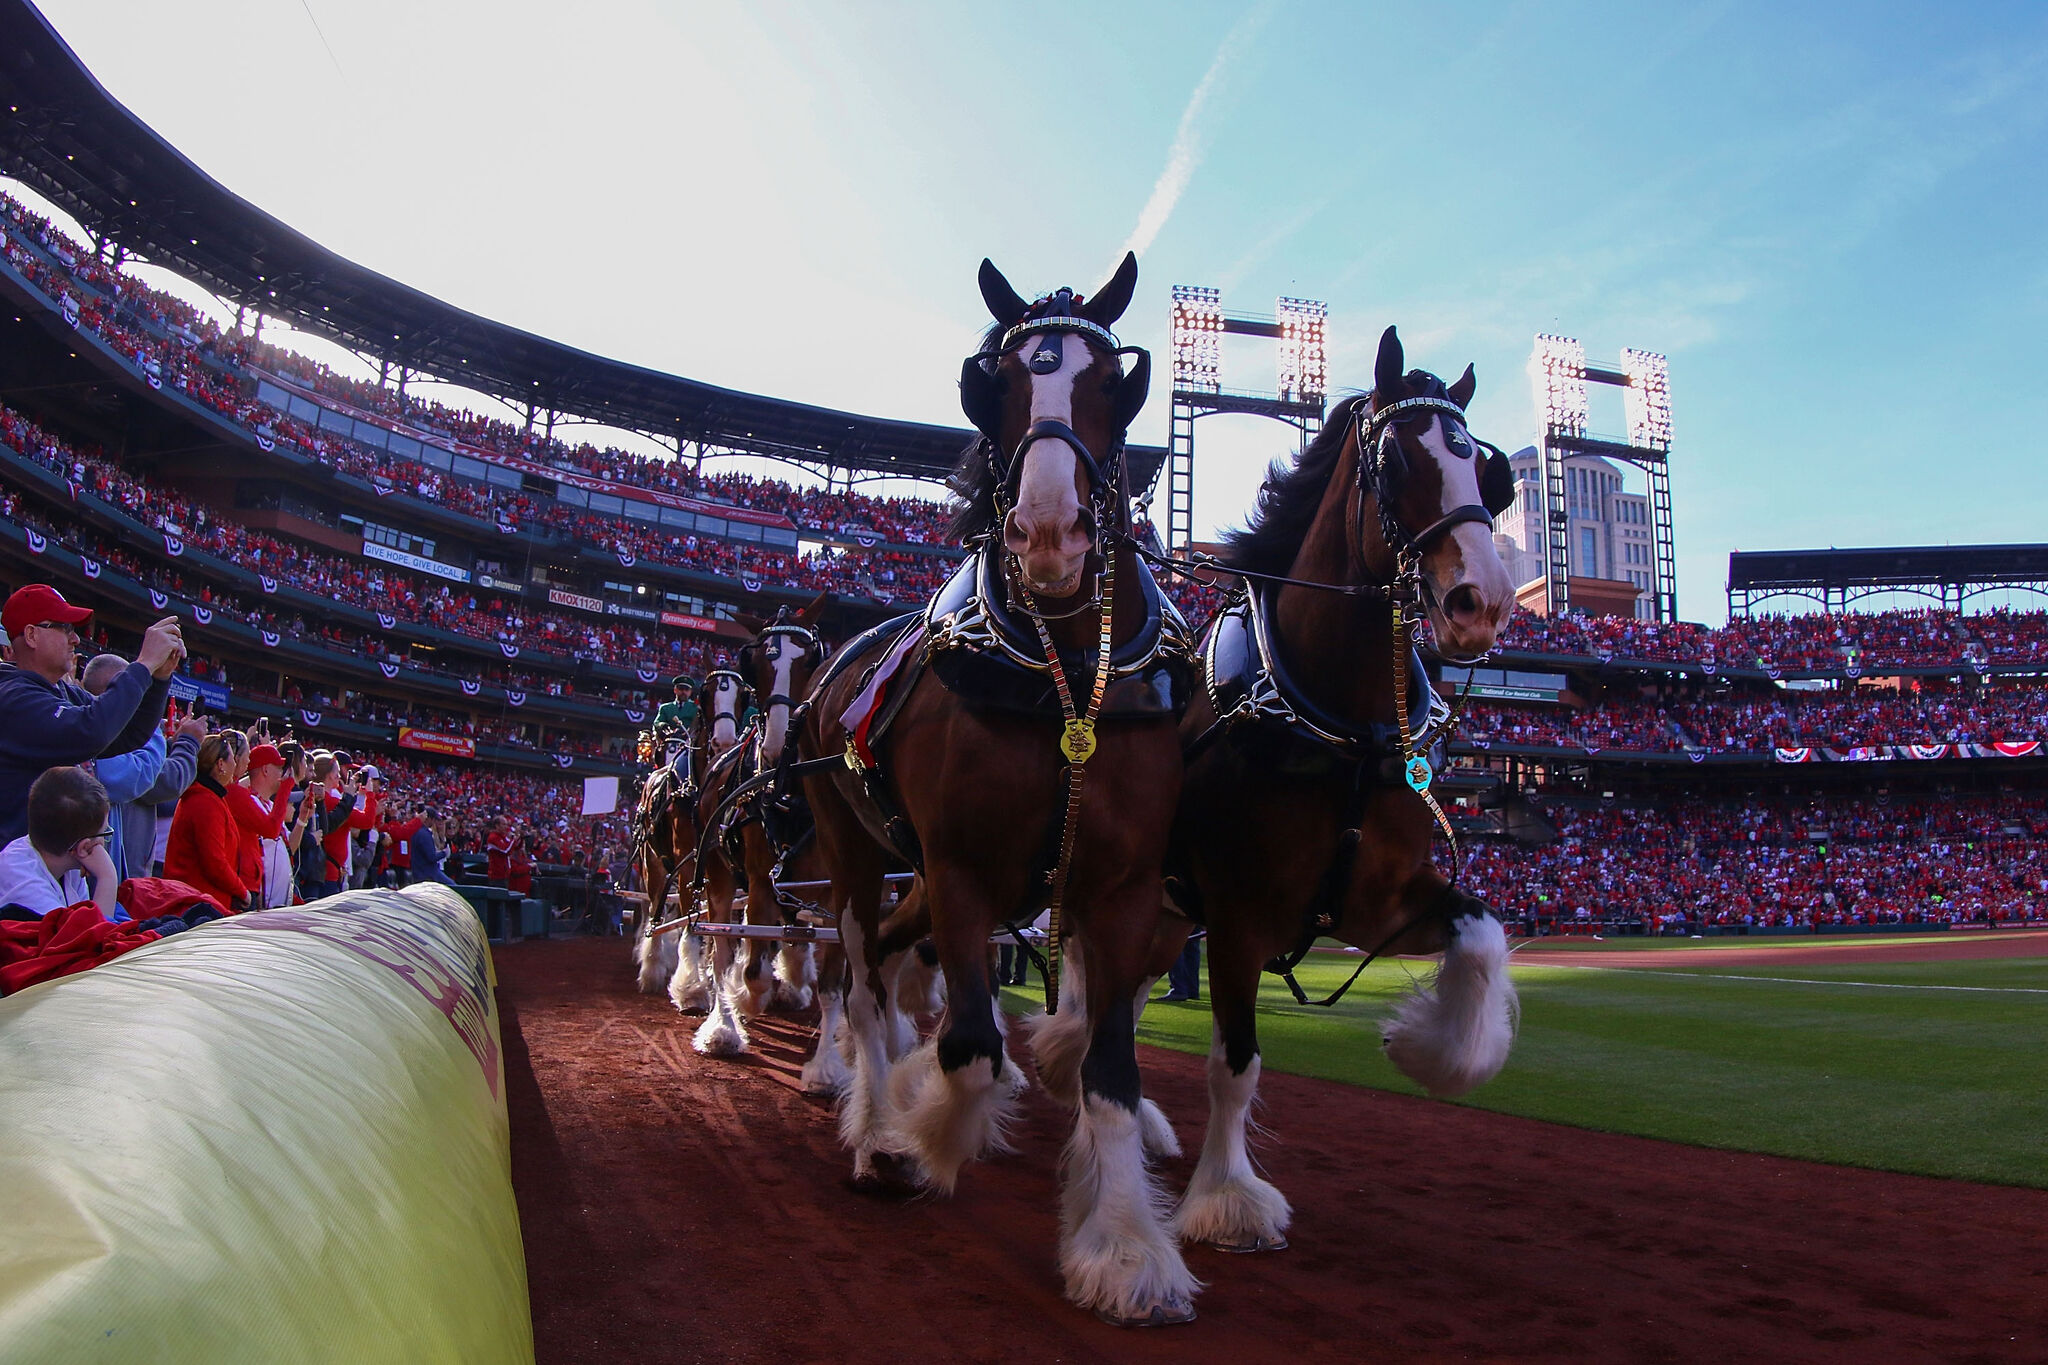 Budweiser Clydesdales tangled in San Antonio, Texas rodeo accident